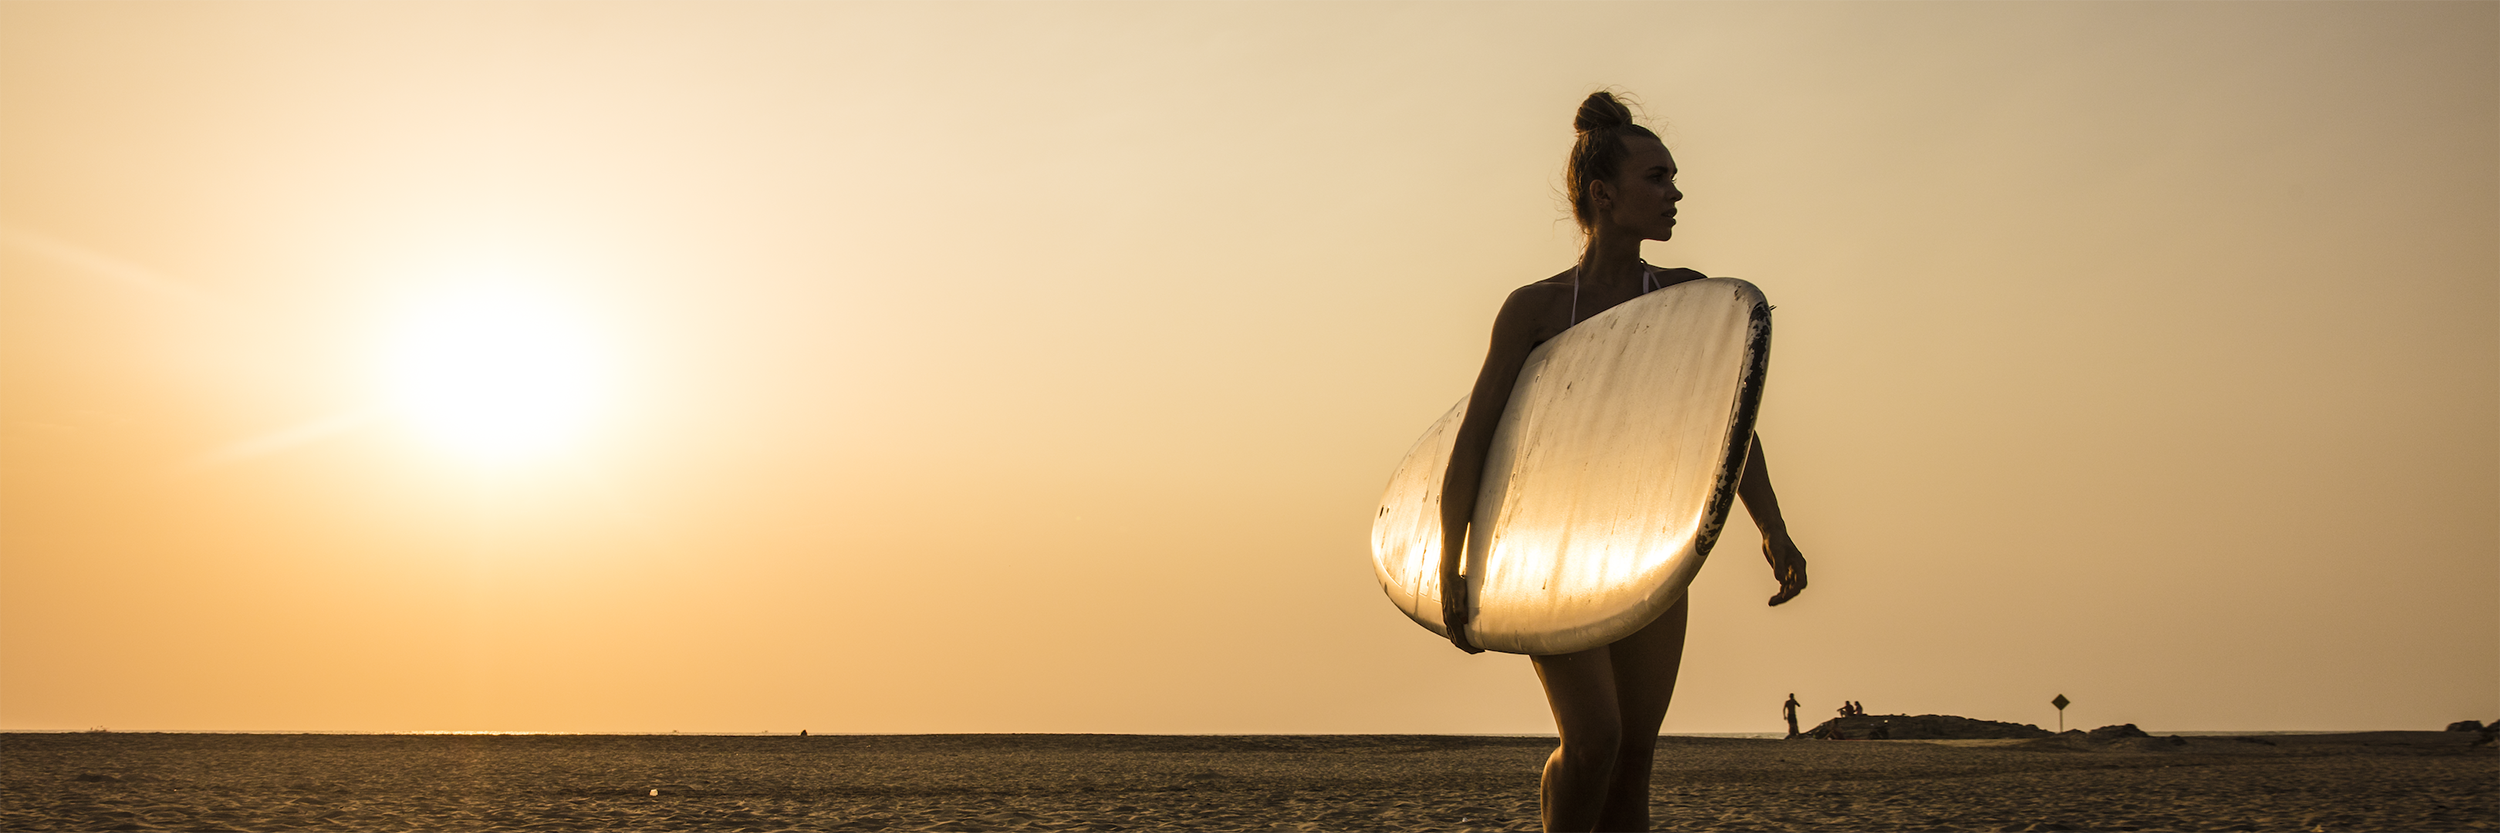 woman on the beach carrying a surf board at sunset